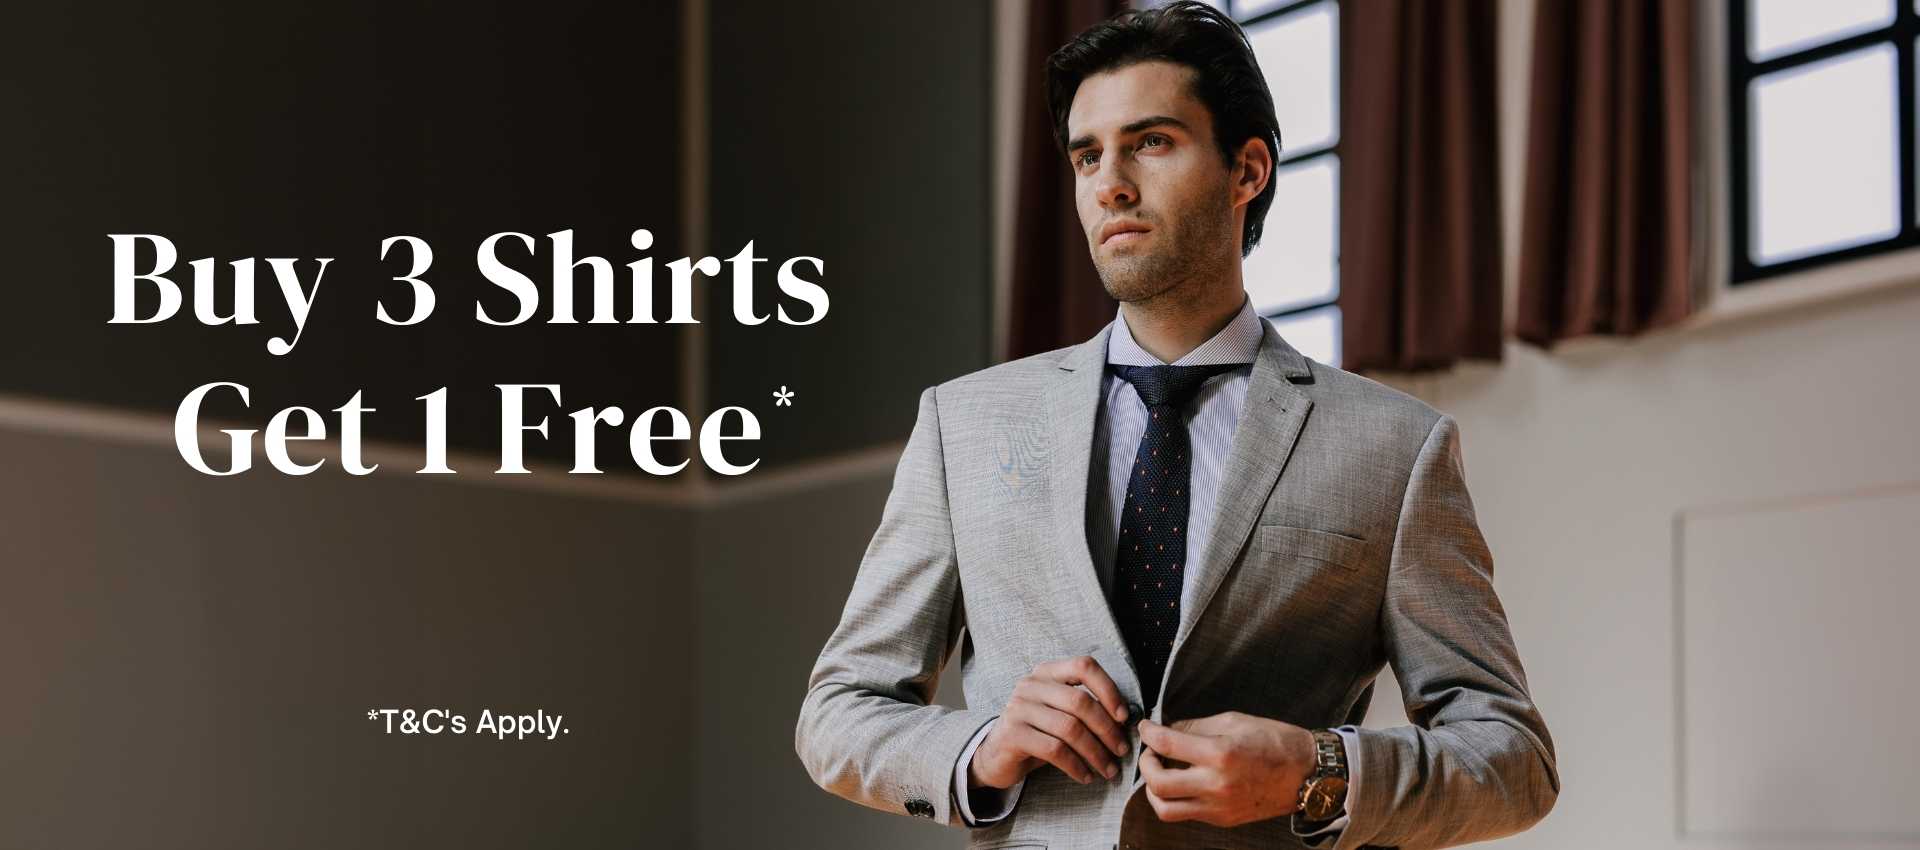 Premium Linen Dress Shirts for Men from Dandy & Son. Image of a man wearing a Extreme Cutaway Collar Shirt from Dandy & Son. Buy 3 Shirts, get 1 Free.